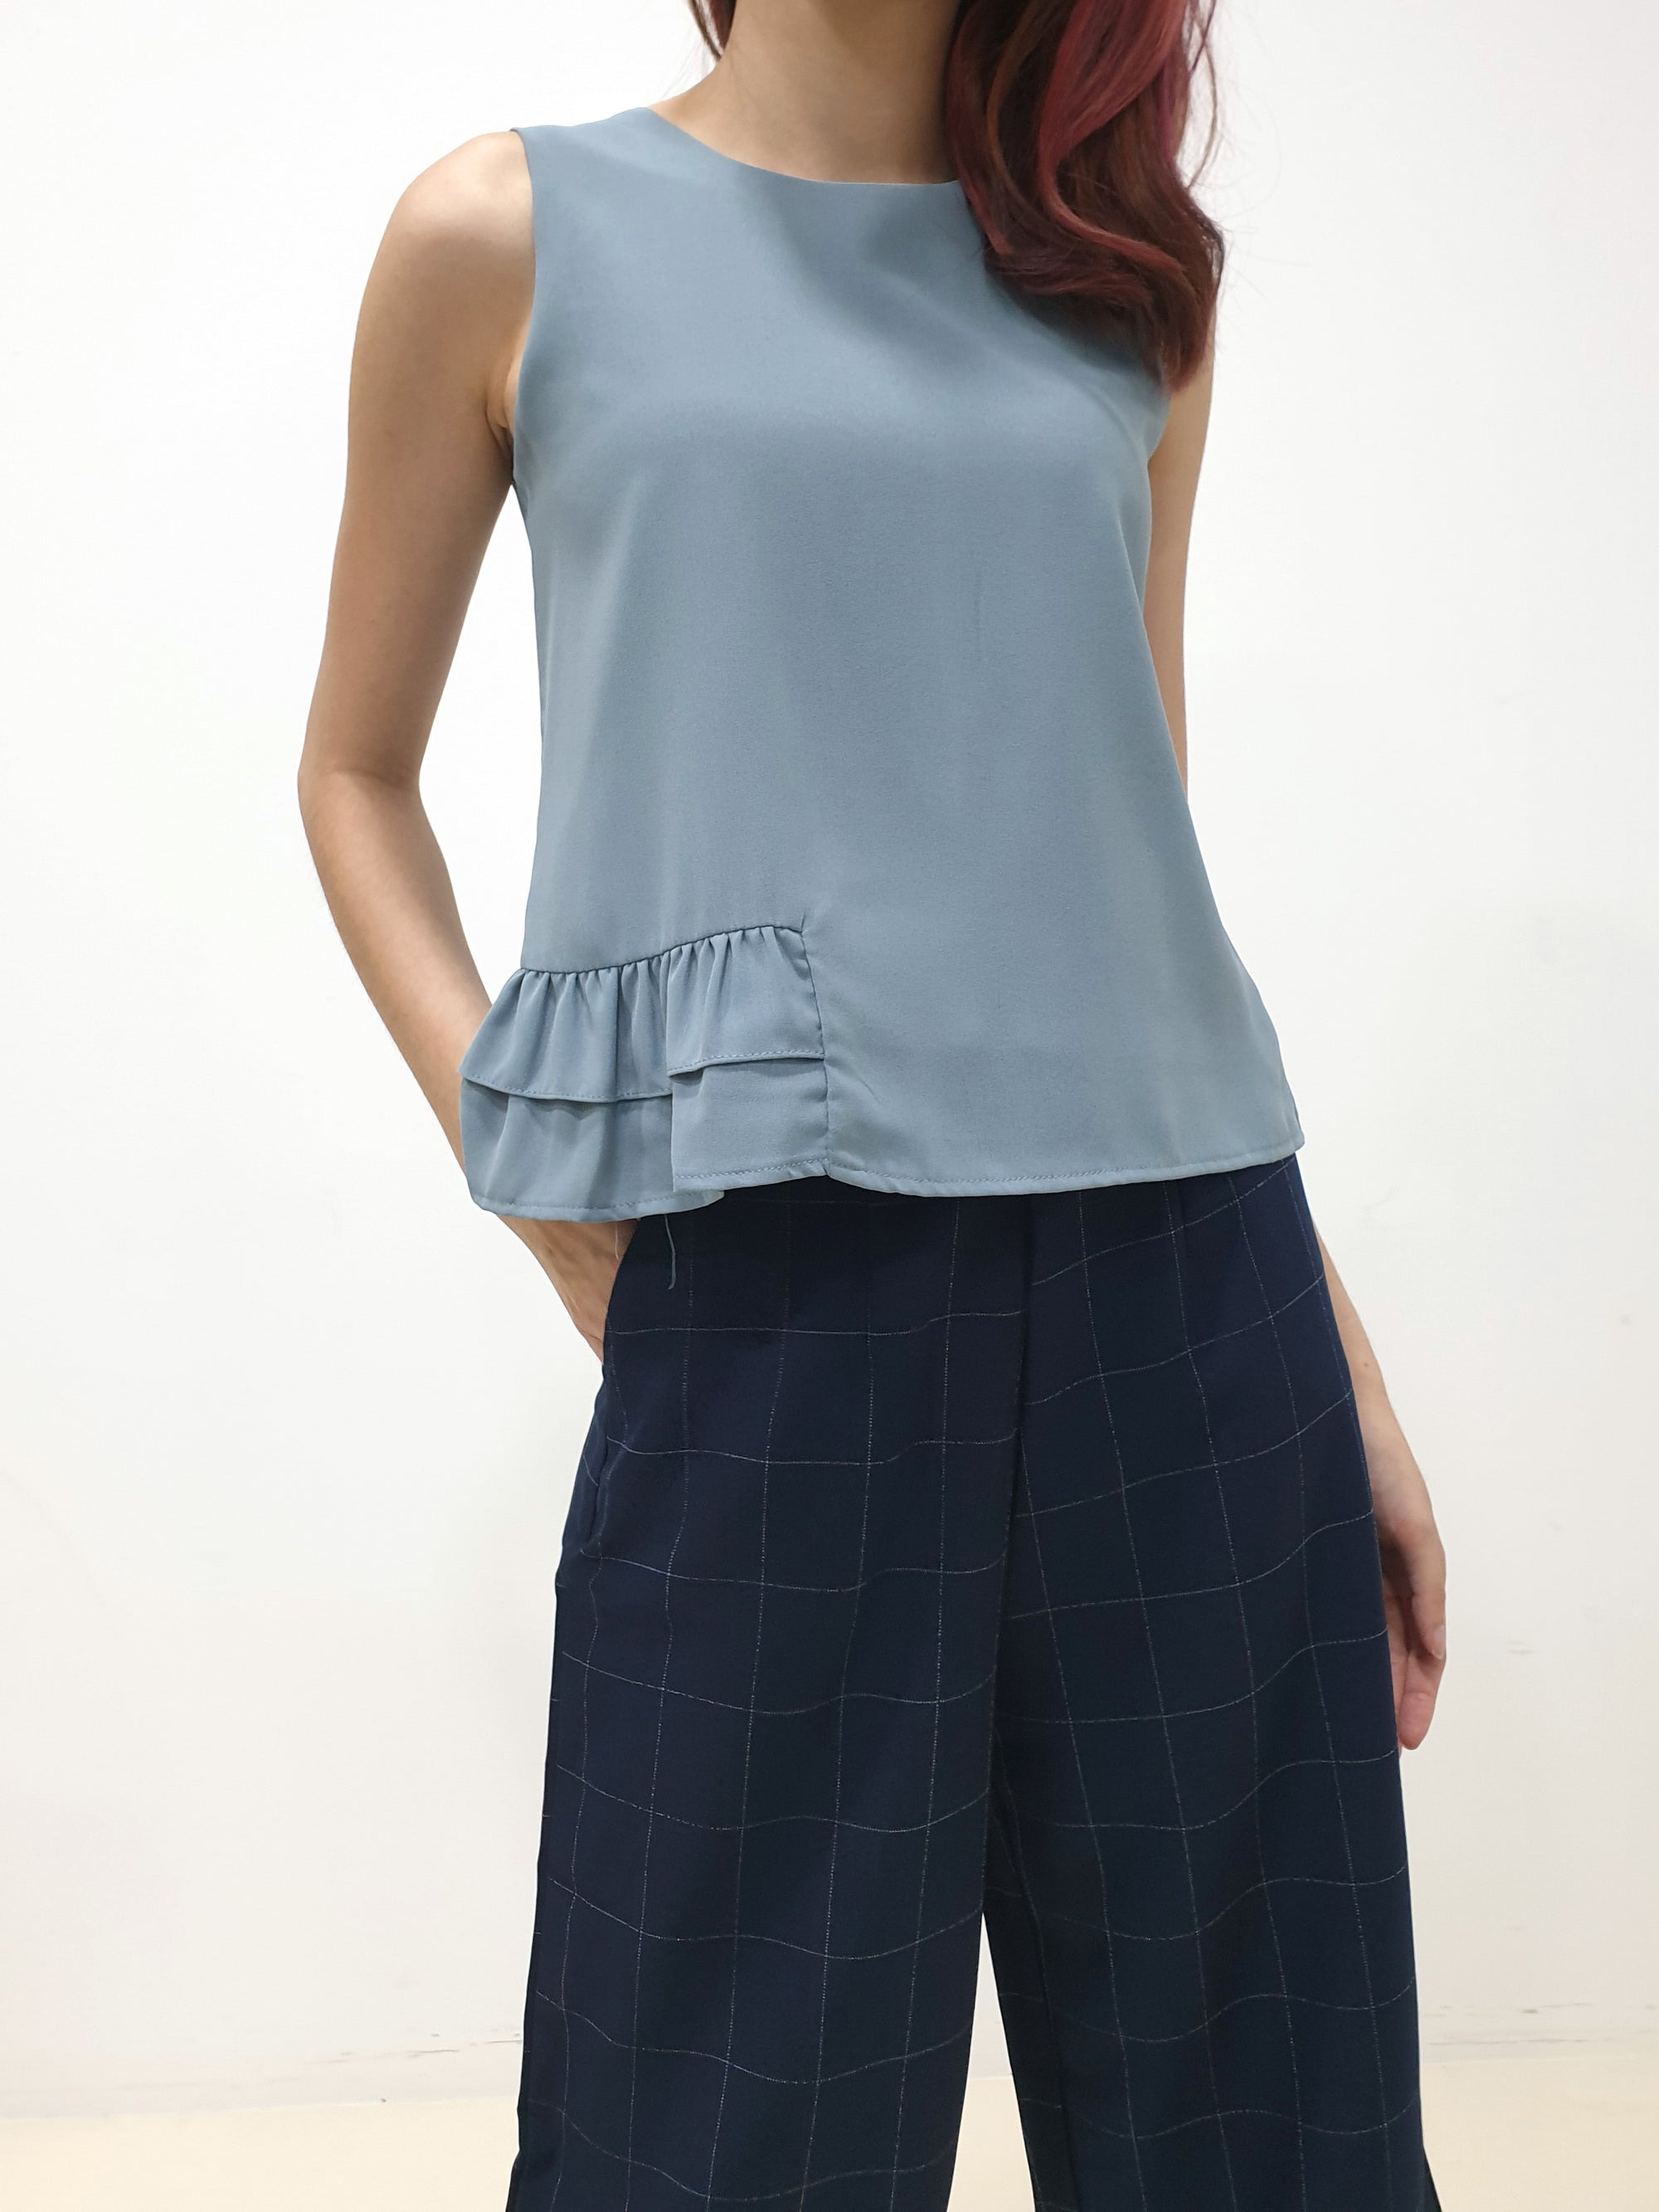 Side Ruffles Top (Non-returnable) - Ferlicious